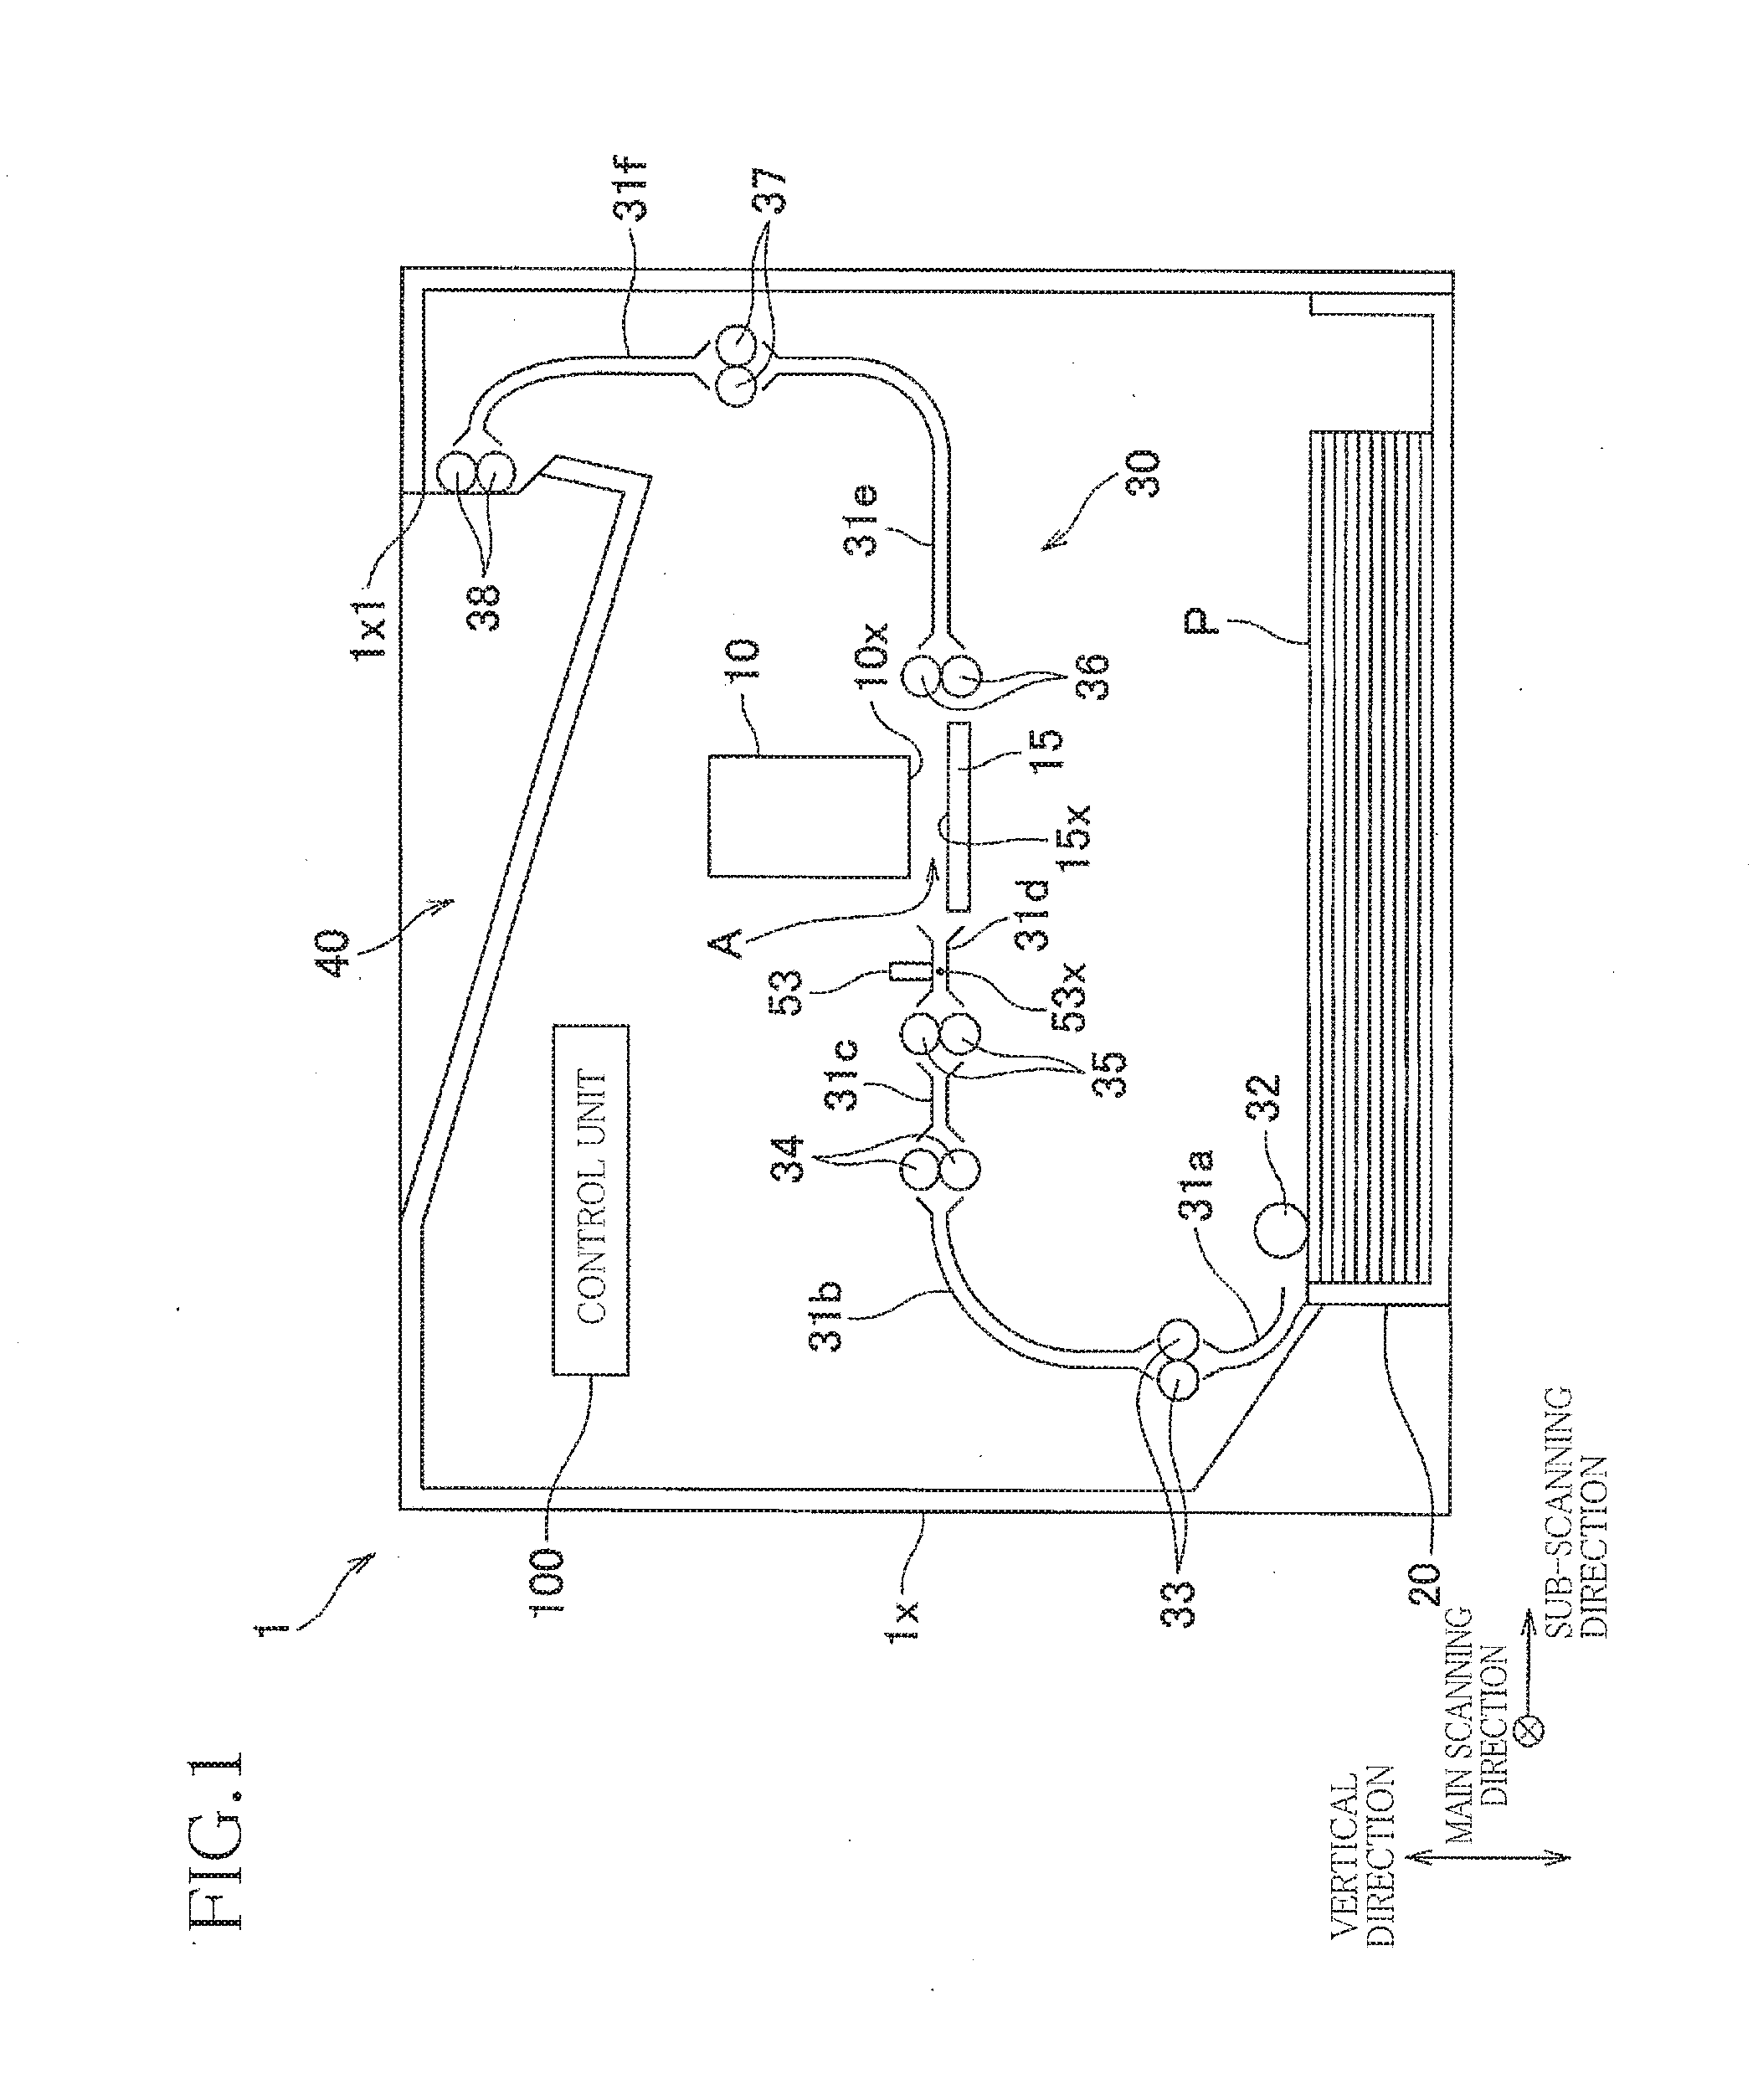 Recording Apparatus and Non-Transitory Storage Medium Storing Instructions Executable by the Recording Apparatus